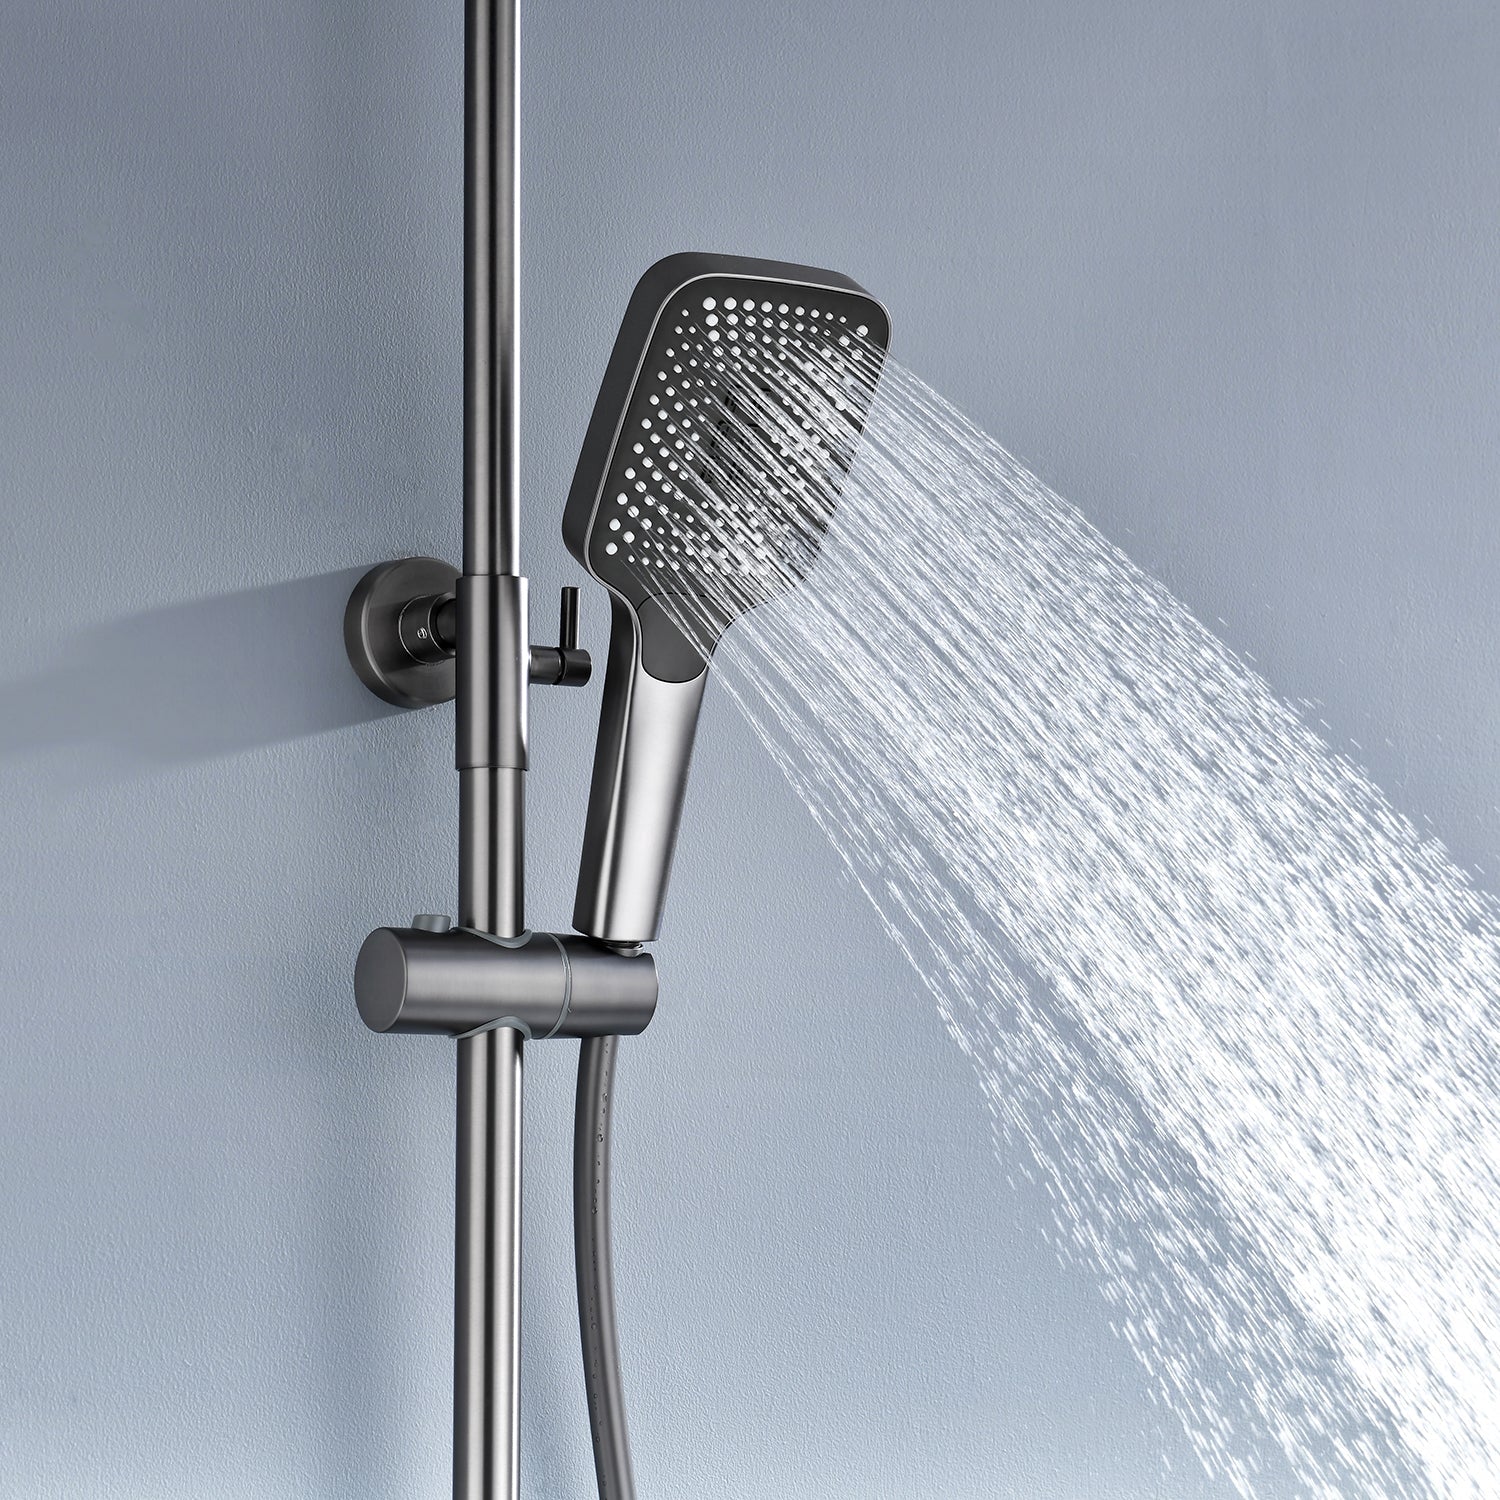 Lefton Thermostatic Shower System with Temperature Display and 4 Water Outlet Modes-SST2204